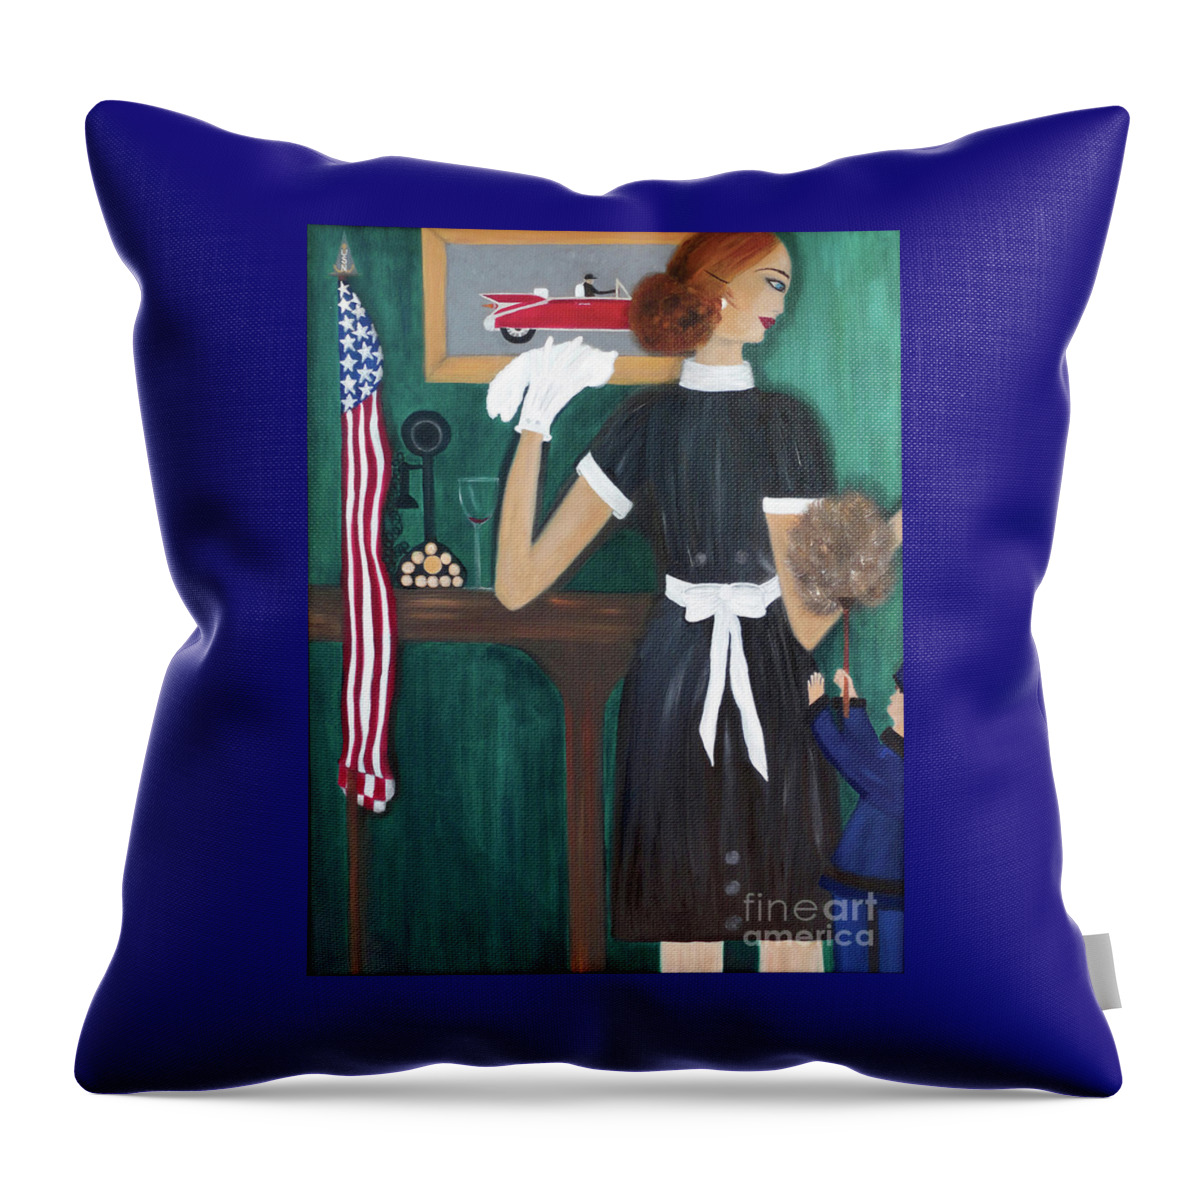 Maid Throw Pillow featuring the painting Maid In America by Artist Linda Marie